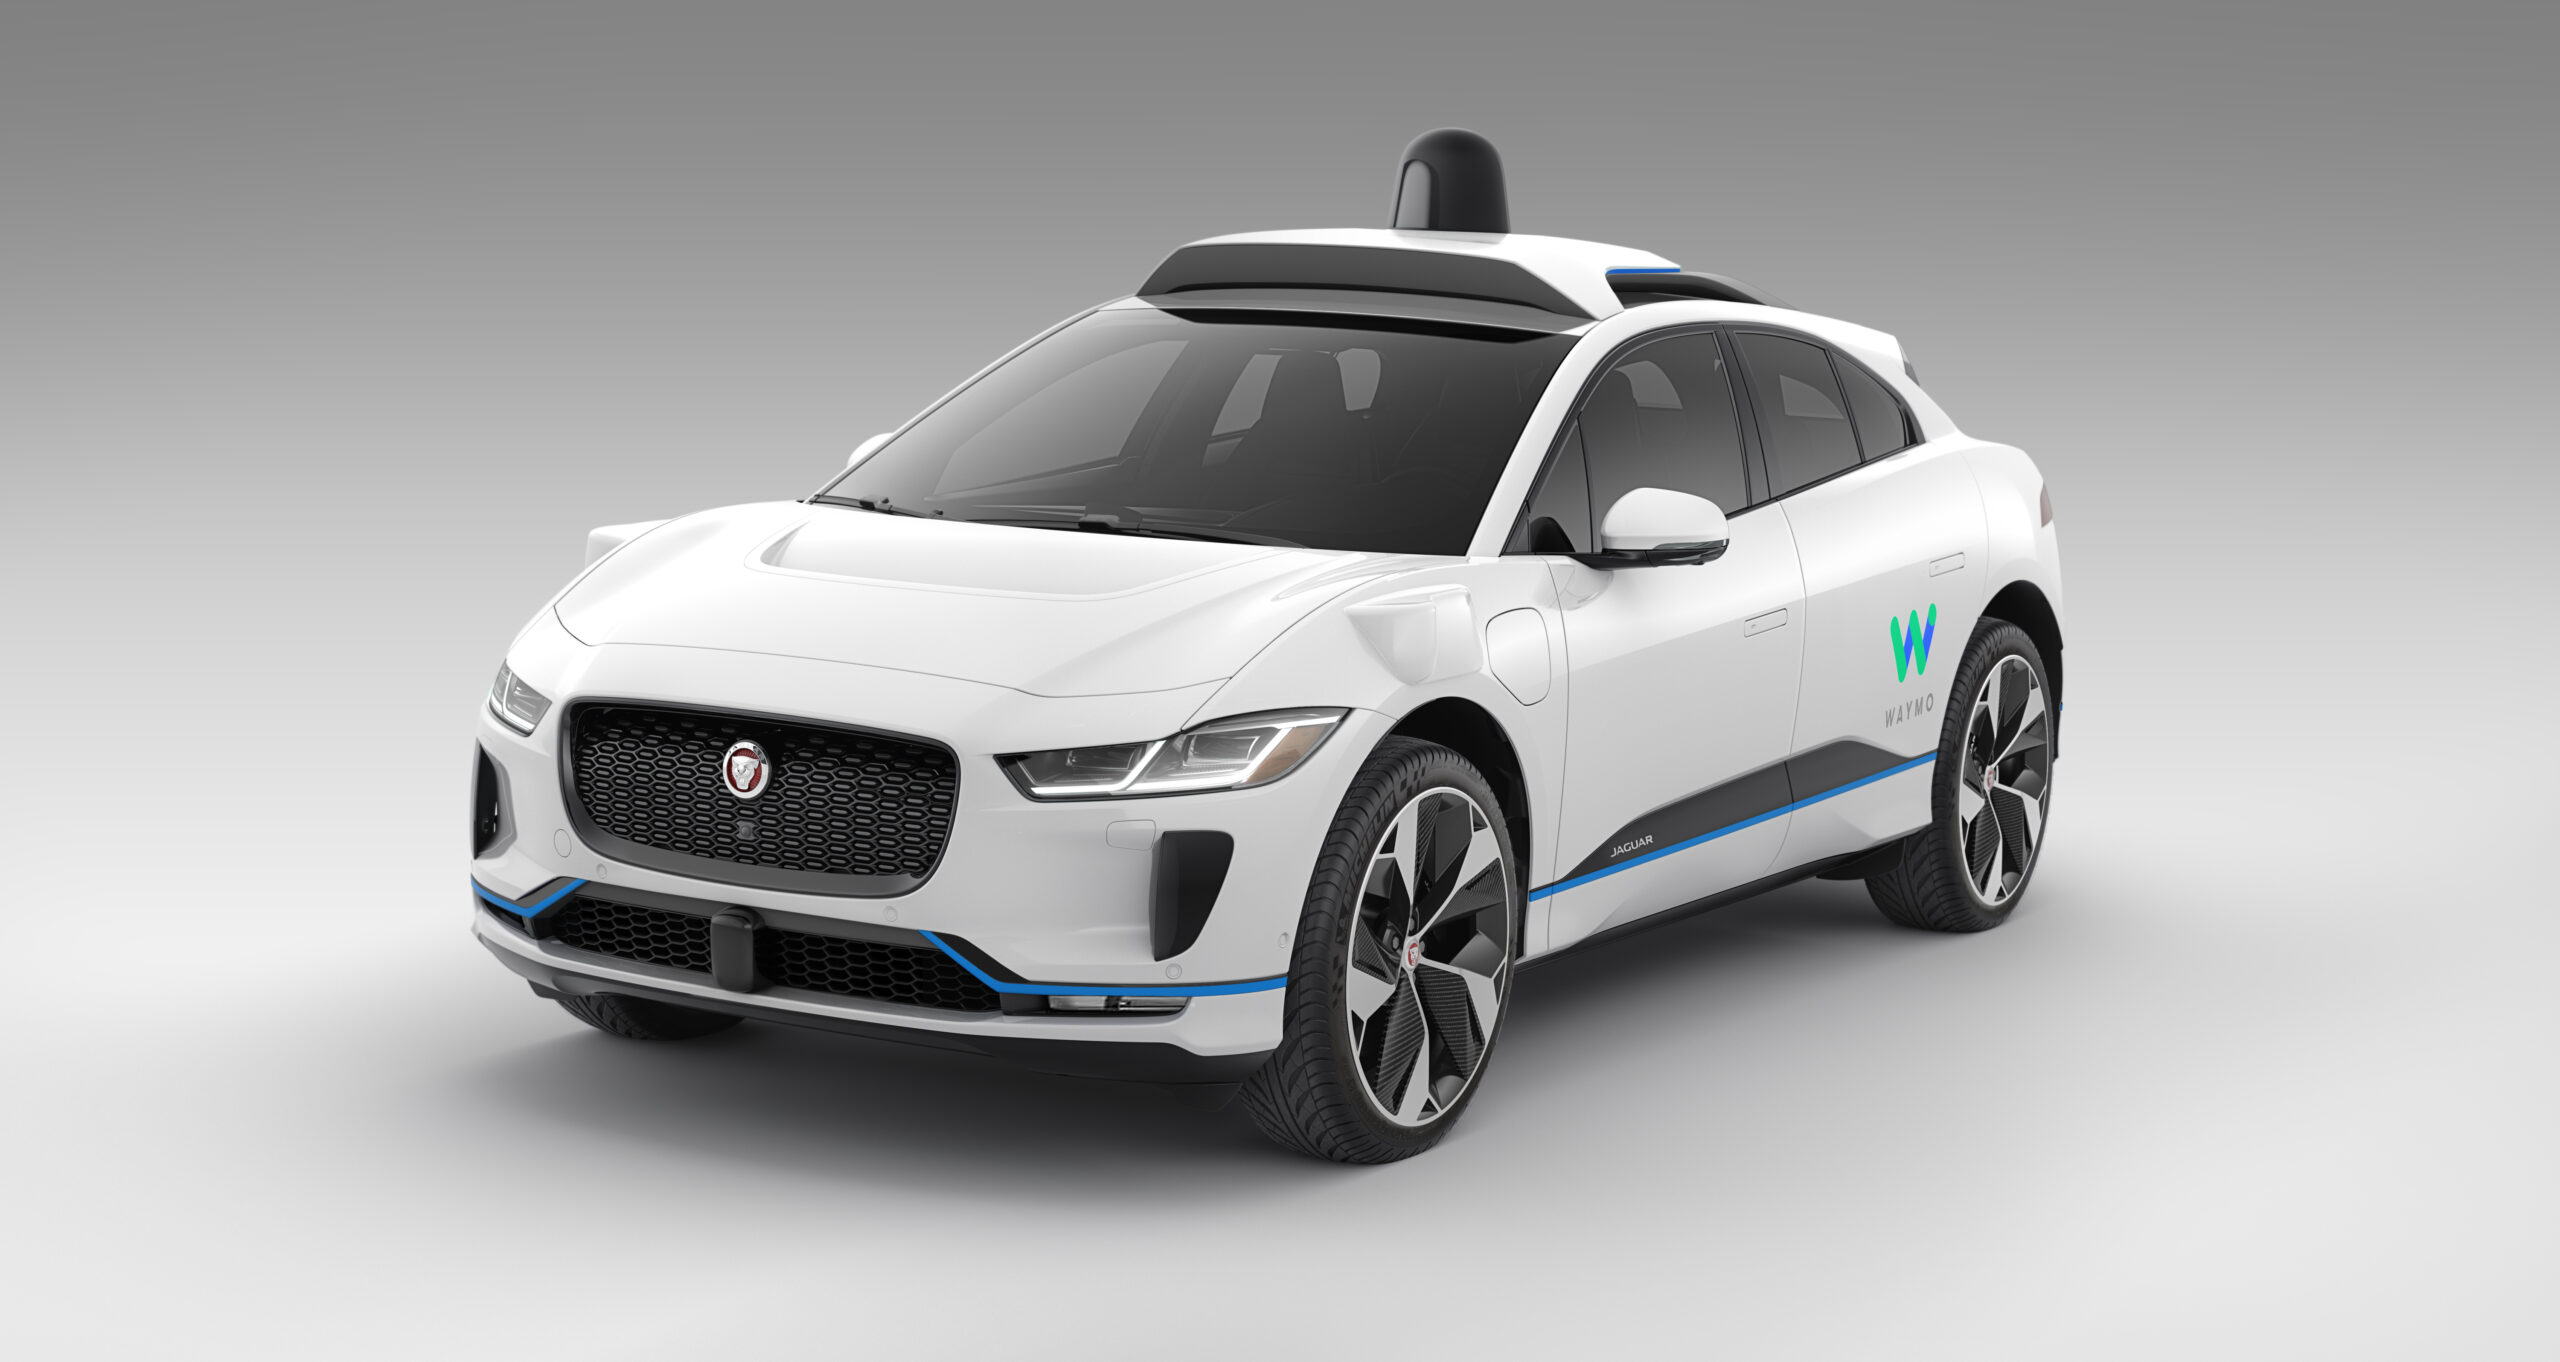 Waymo’s new self-driving cars are electric Jaguars loaded with sensors and cameras